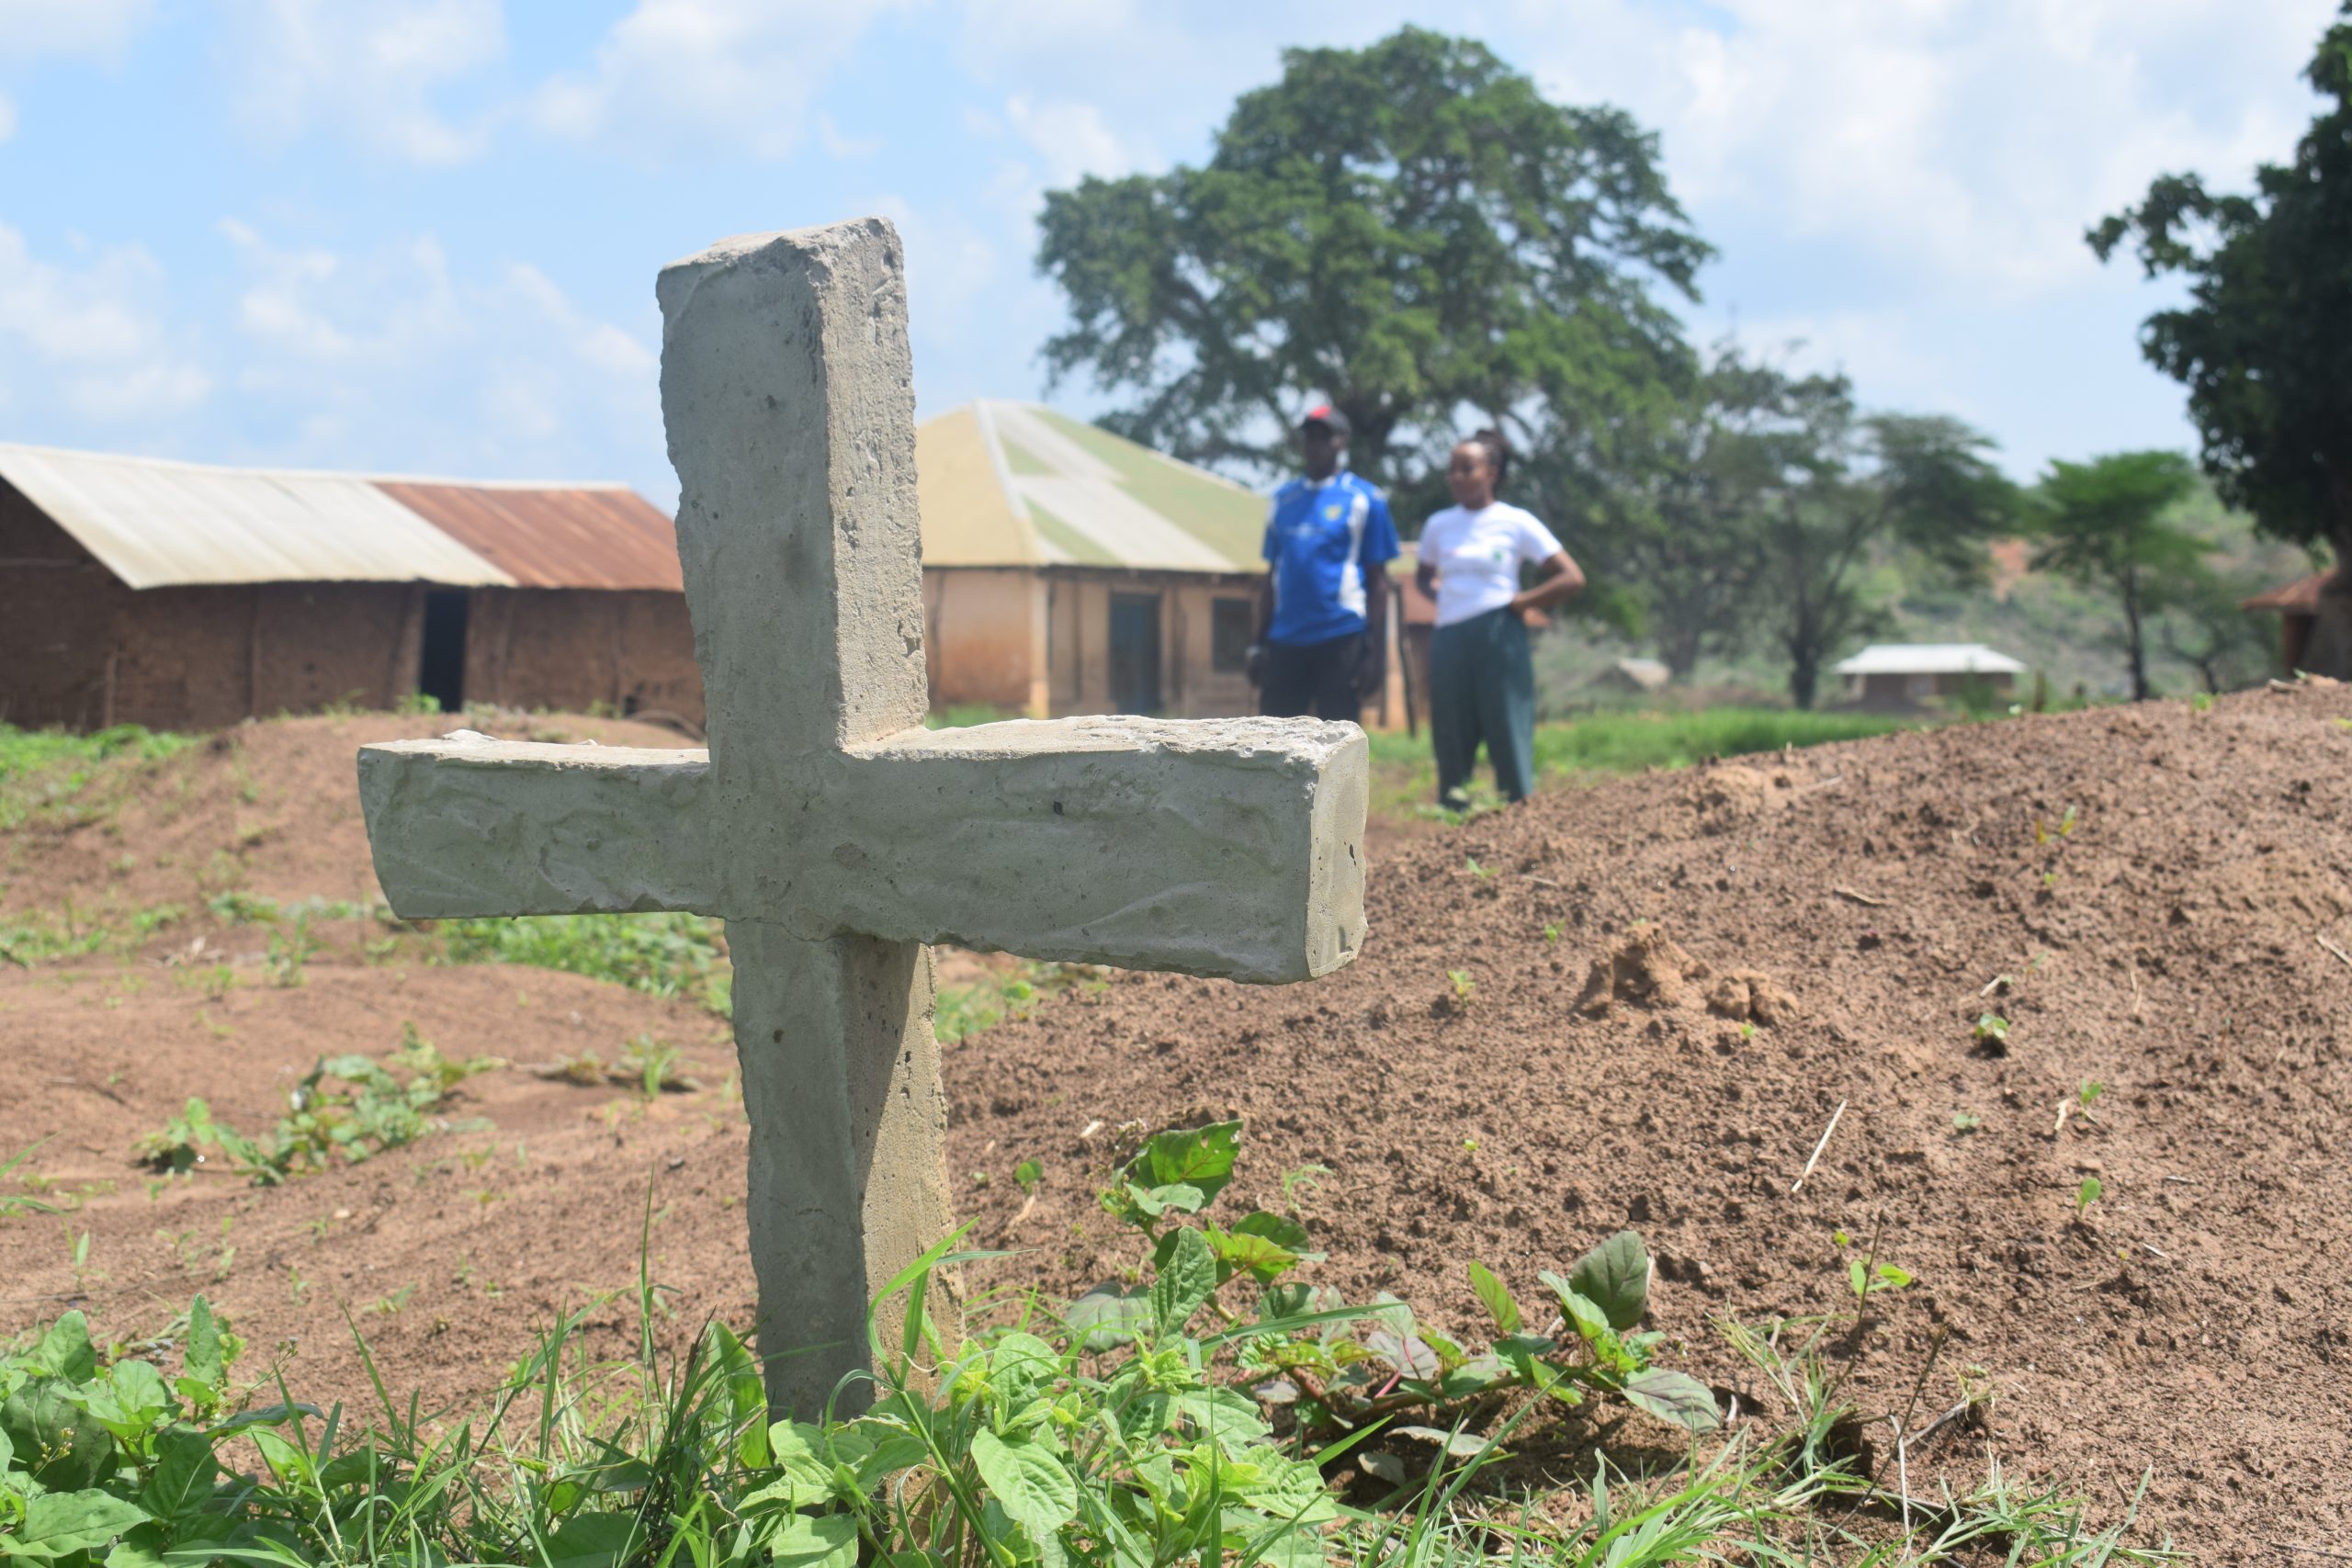 Haki Yetu Org Officer Warda Nzighe and the organisation’s Peace Ambassador in Malindi Francis Katana at the grave of Kesi Kenga Salehe in Kavunyalalo Village, Malindi Sub-County in Kilifi. Mr Salehe was killed in December 2021 by a mob who accused him of bewitching his two brothers who had earlier died out of road accident and Covid-19 respectively. /Photo Courtesy of Haki Yetu Org.